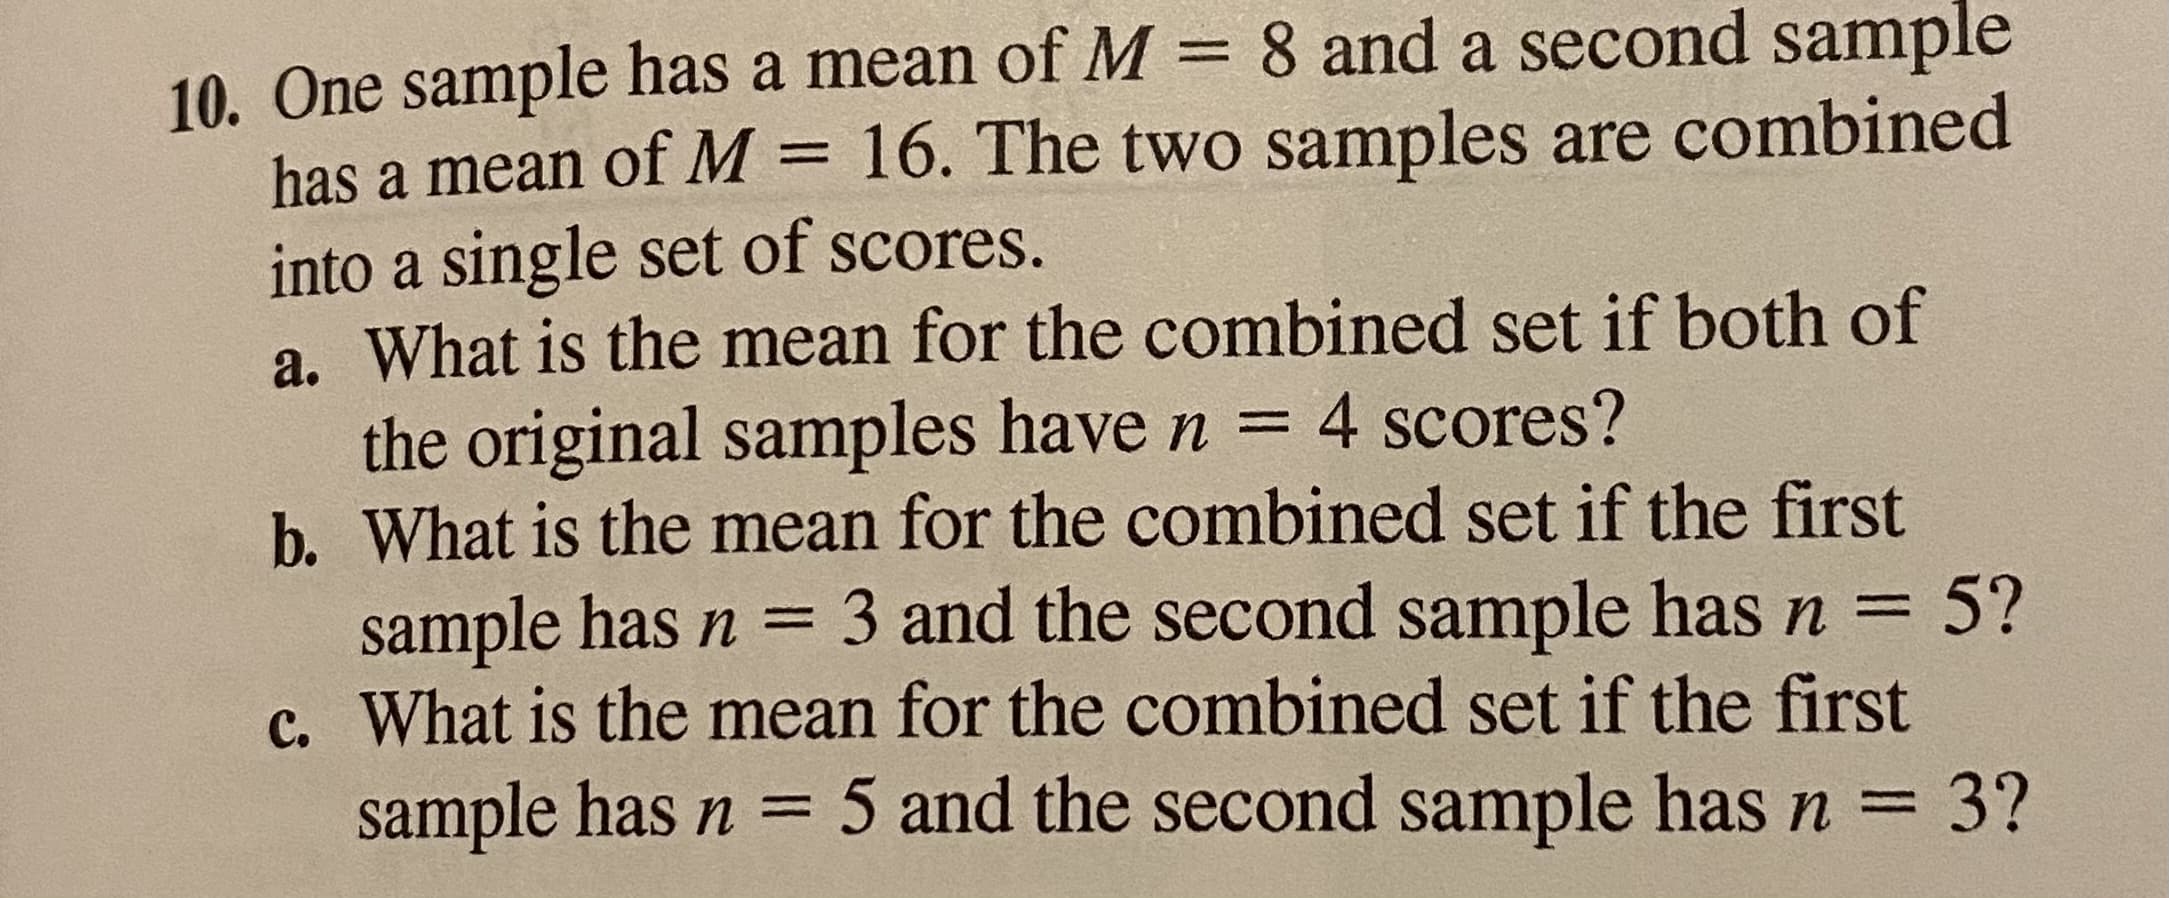 10. One sample has a mean of M = 8 and a second sample
has a mean of M = 16. The two samples are combined
into a single set of scores.
a. What is the mean for the combined set if both of
the original samples have n = 4 scores?
b. What is the mean for the combined set if the first
sample has n = 3 and the second sample has n = 5?
c. What is the mean for the combined set if the first
sample has n = 5 and the second sample has n = 3?
